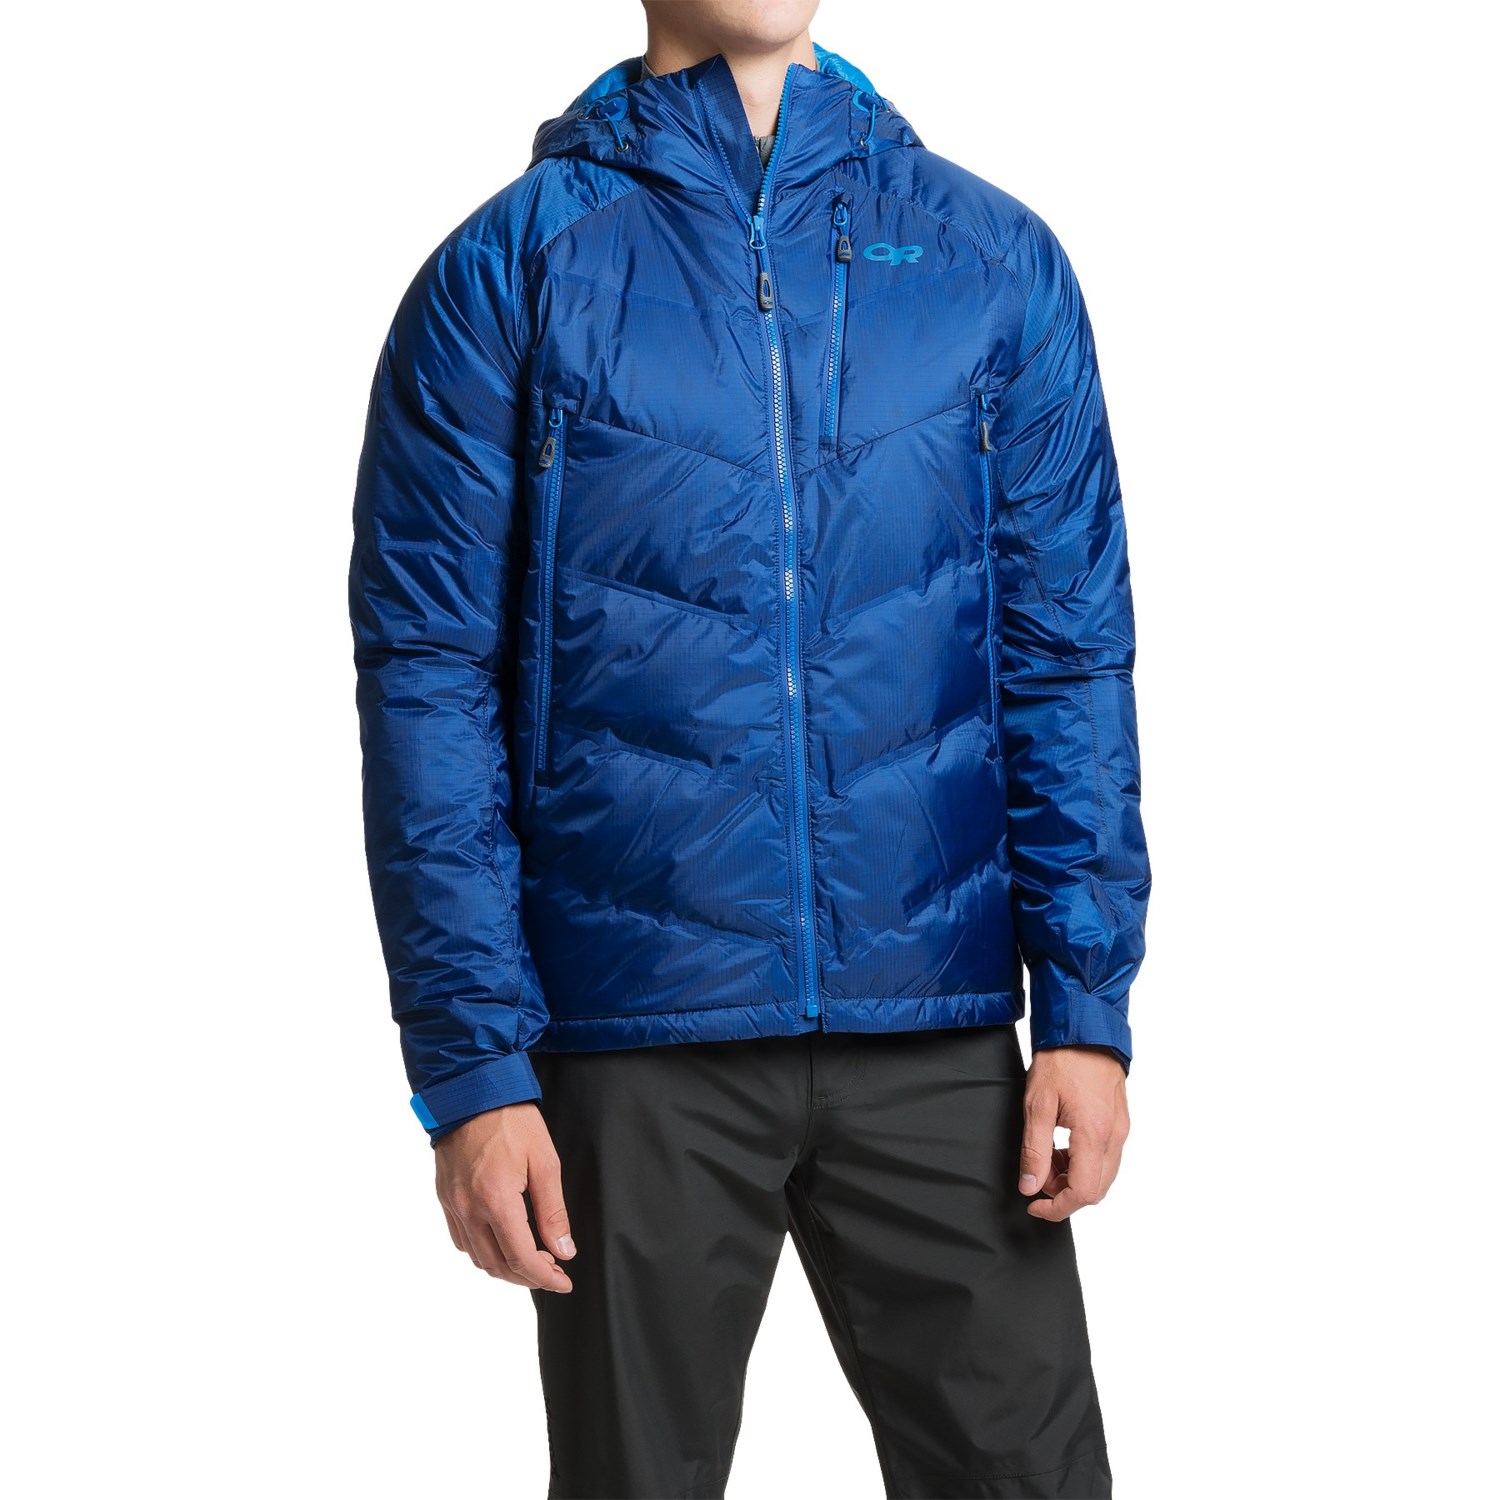 Outdoor Research Floodlight Down Jacket (For Men) 8627J - Save 49%